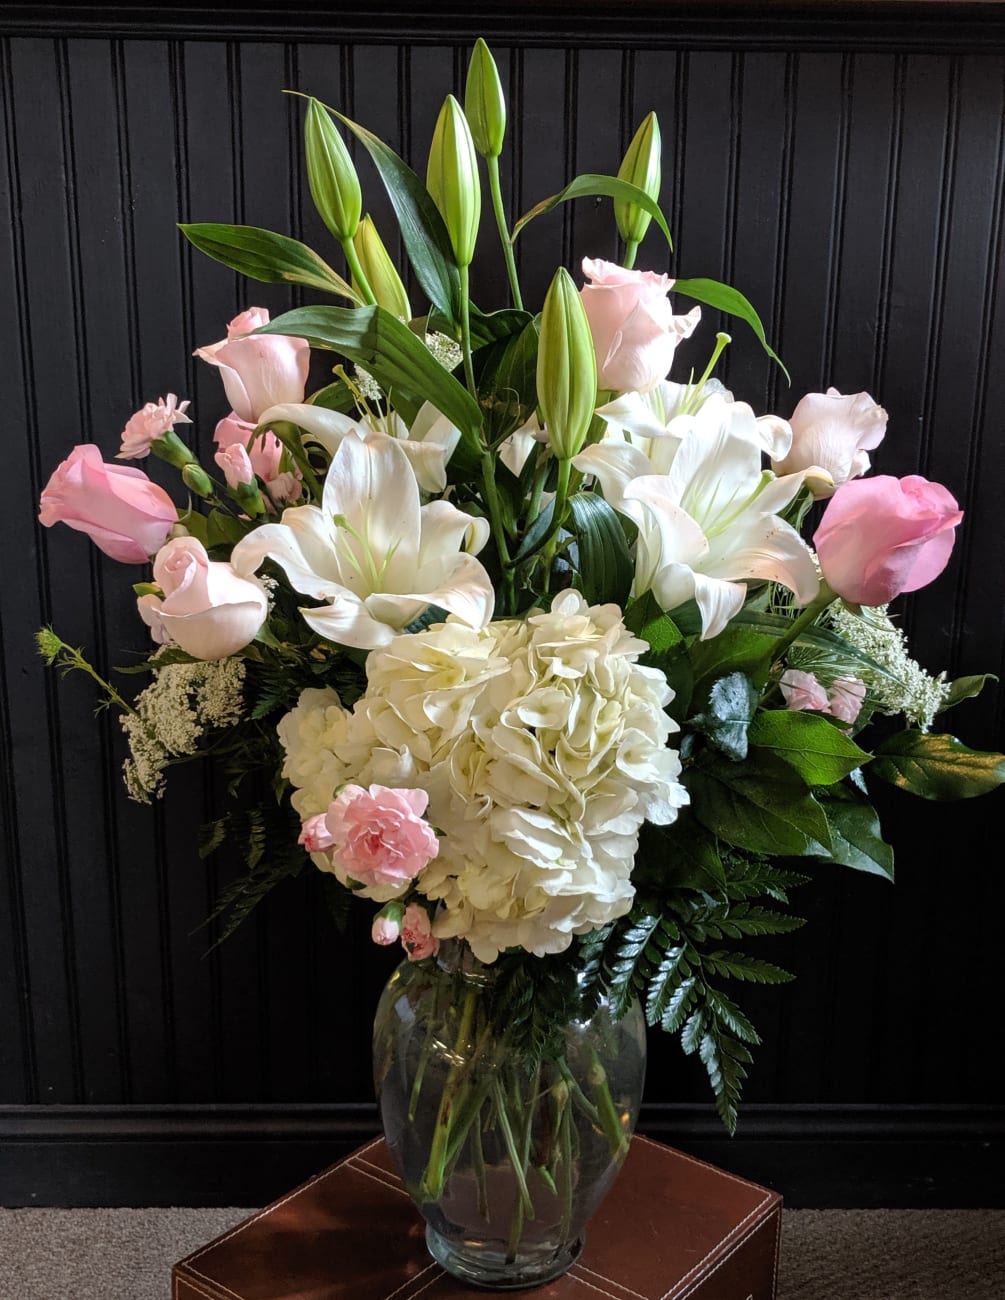 This stunning arrangement with Hydrangeas, lilies, roses, mini carnations is sure take